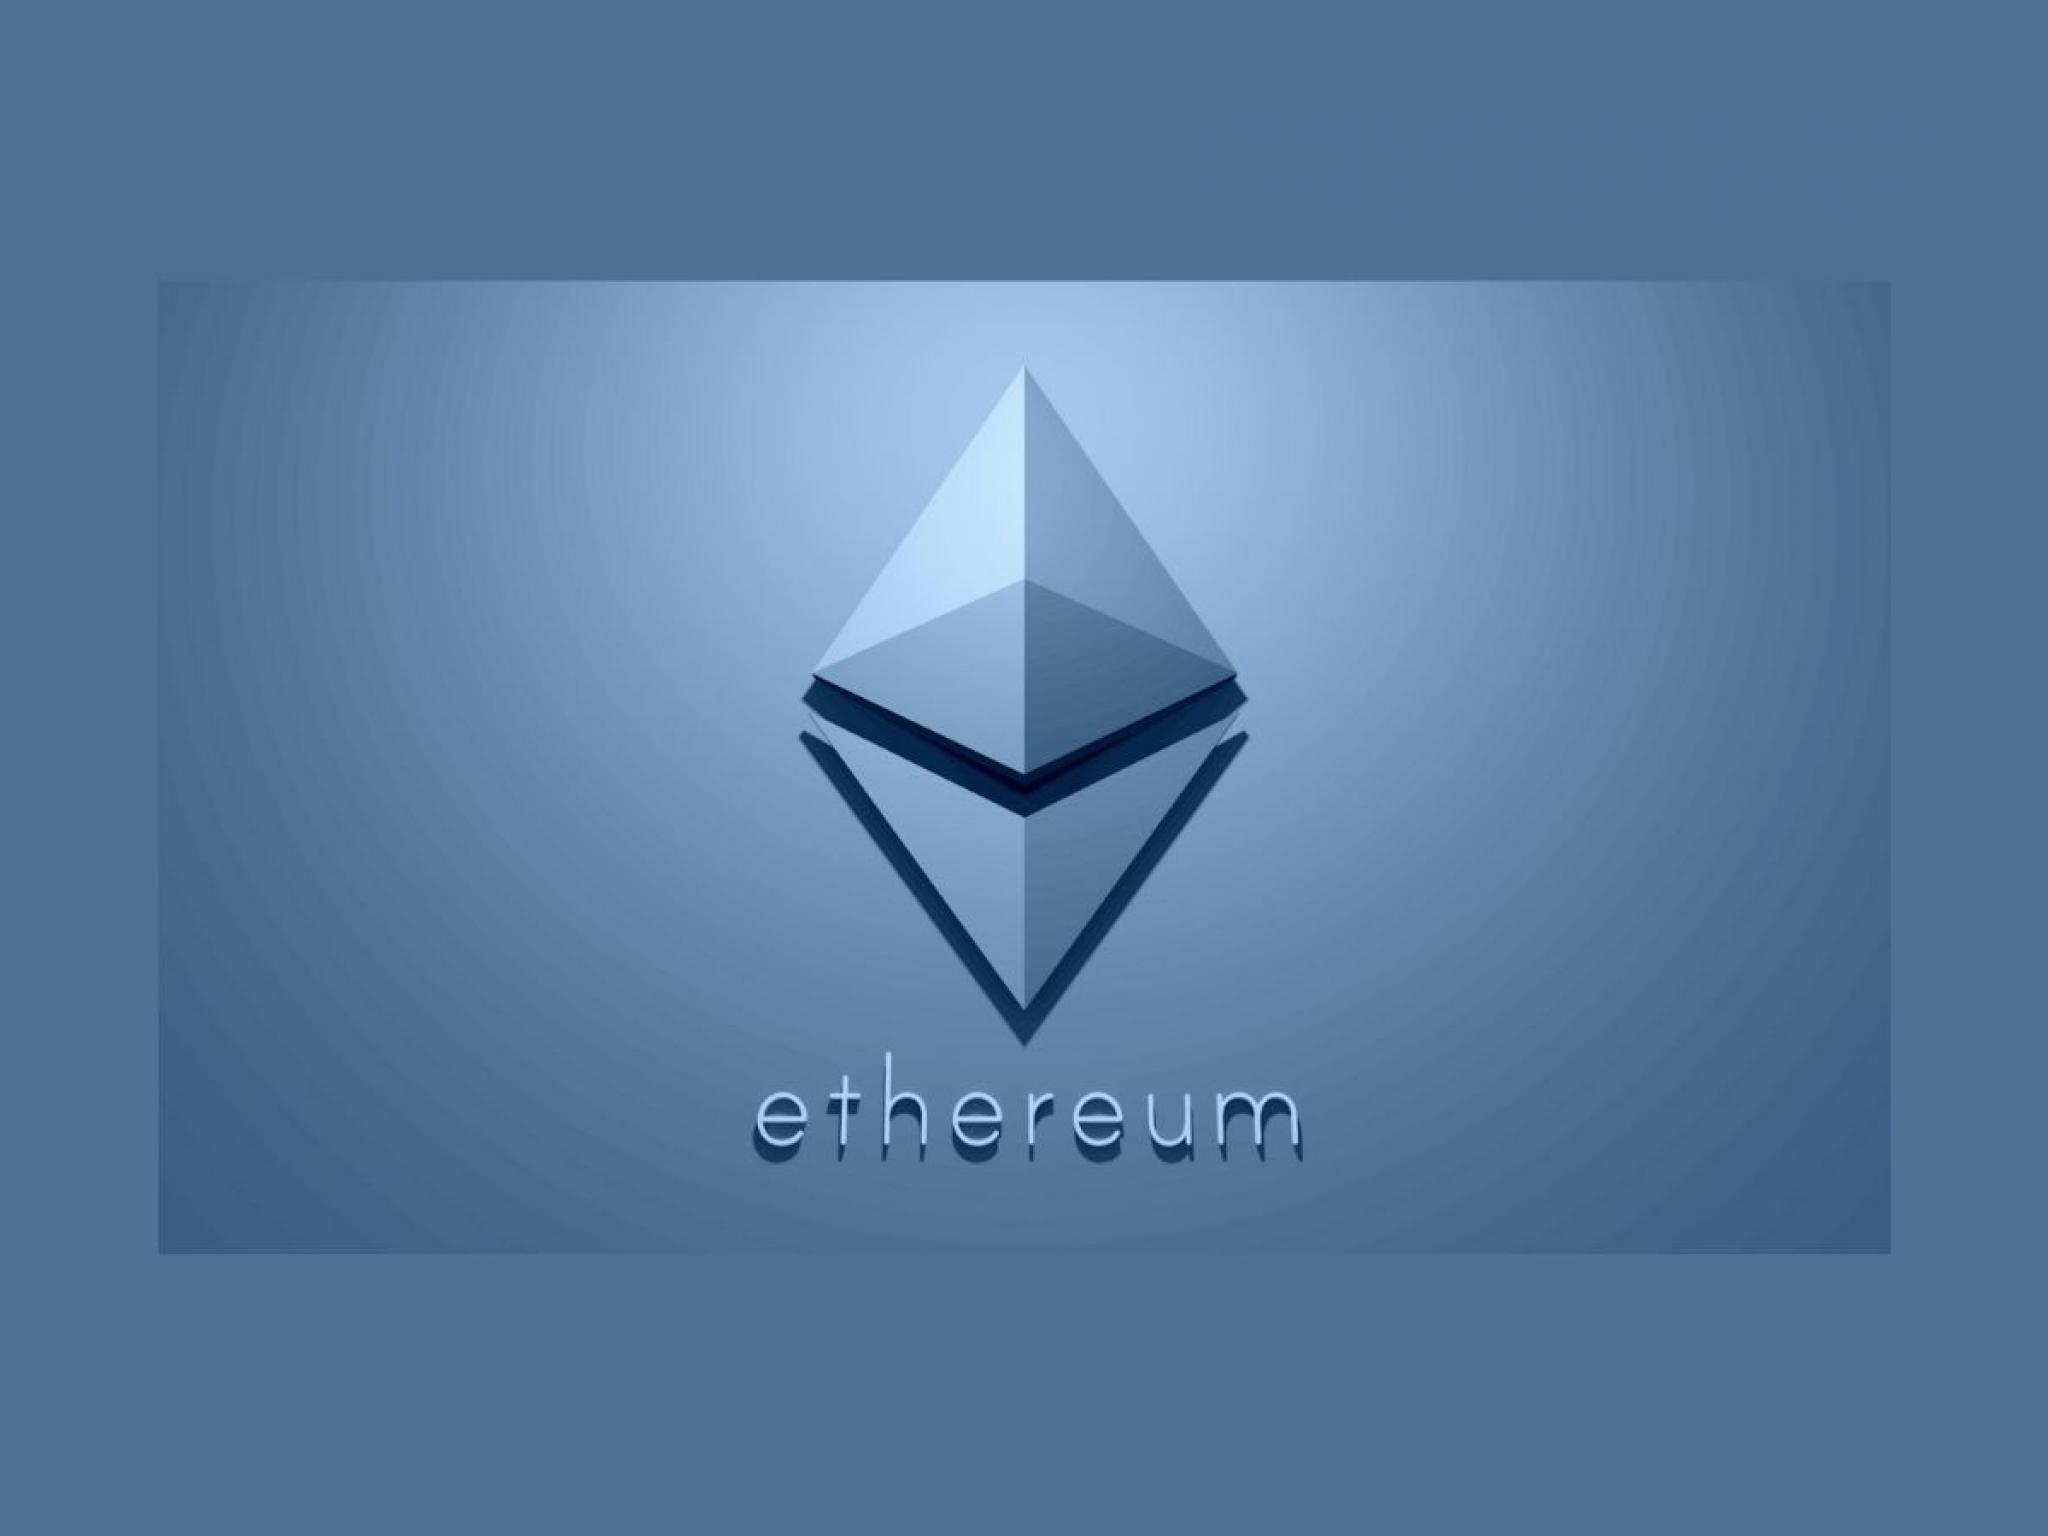  ethereum-falls-but-remains-above-this-key-level-ftx-token-gnosis-among-top-losers 